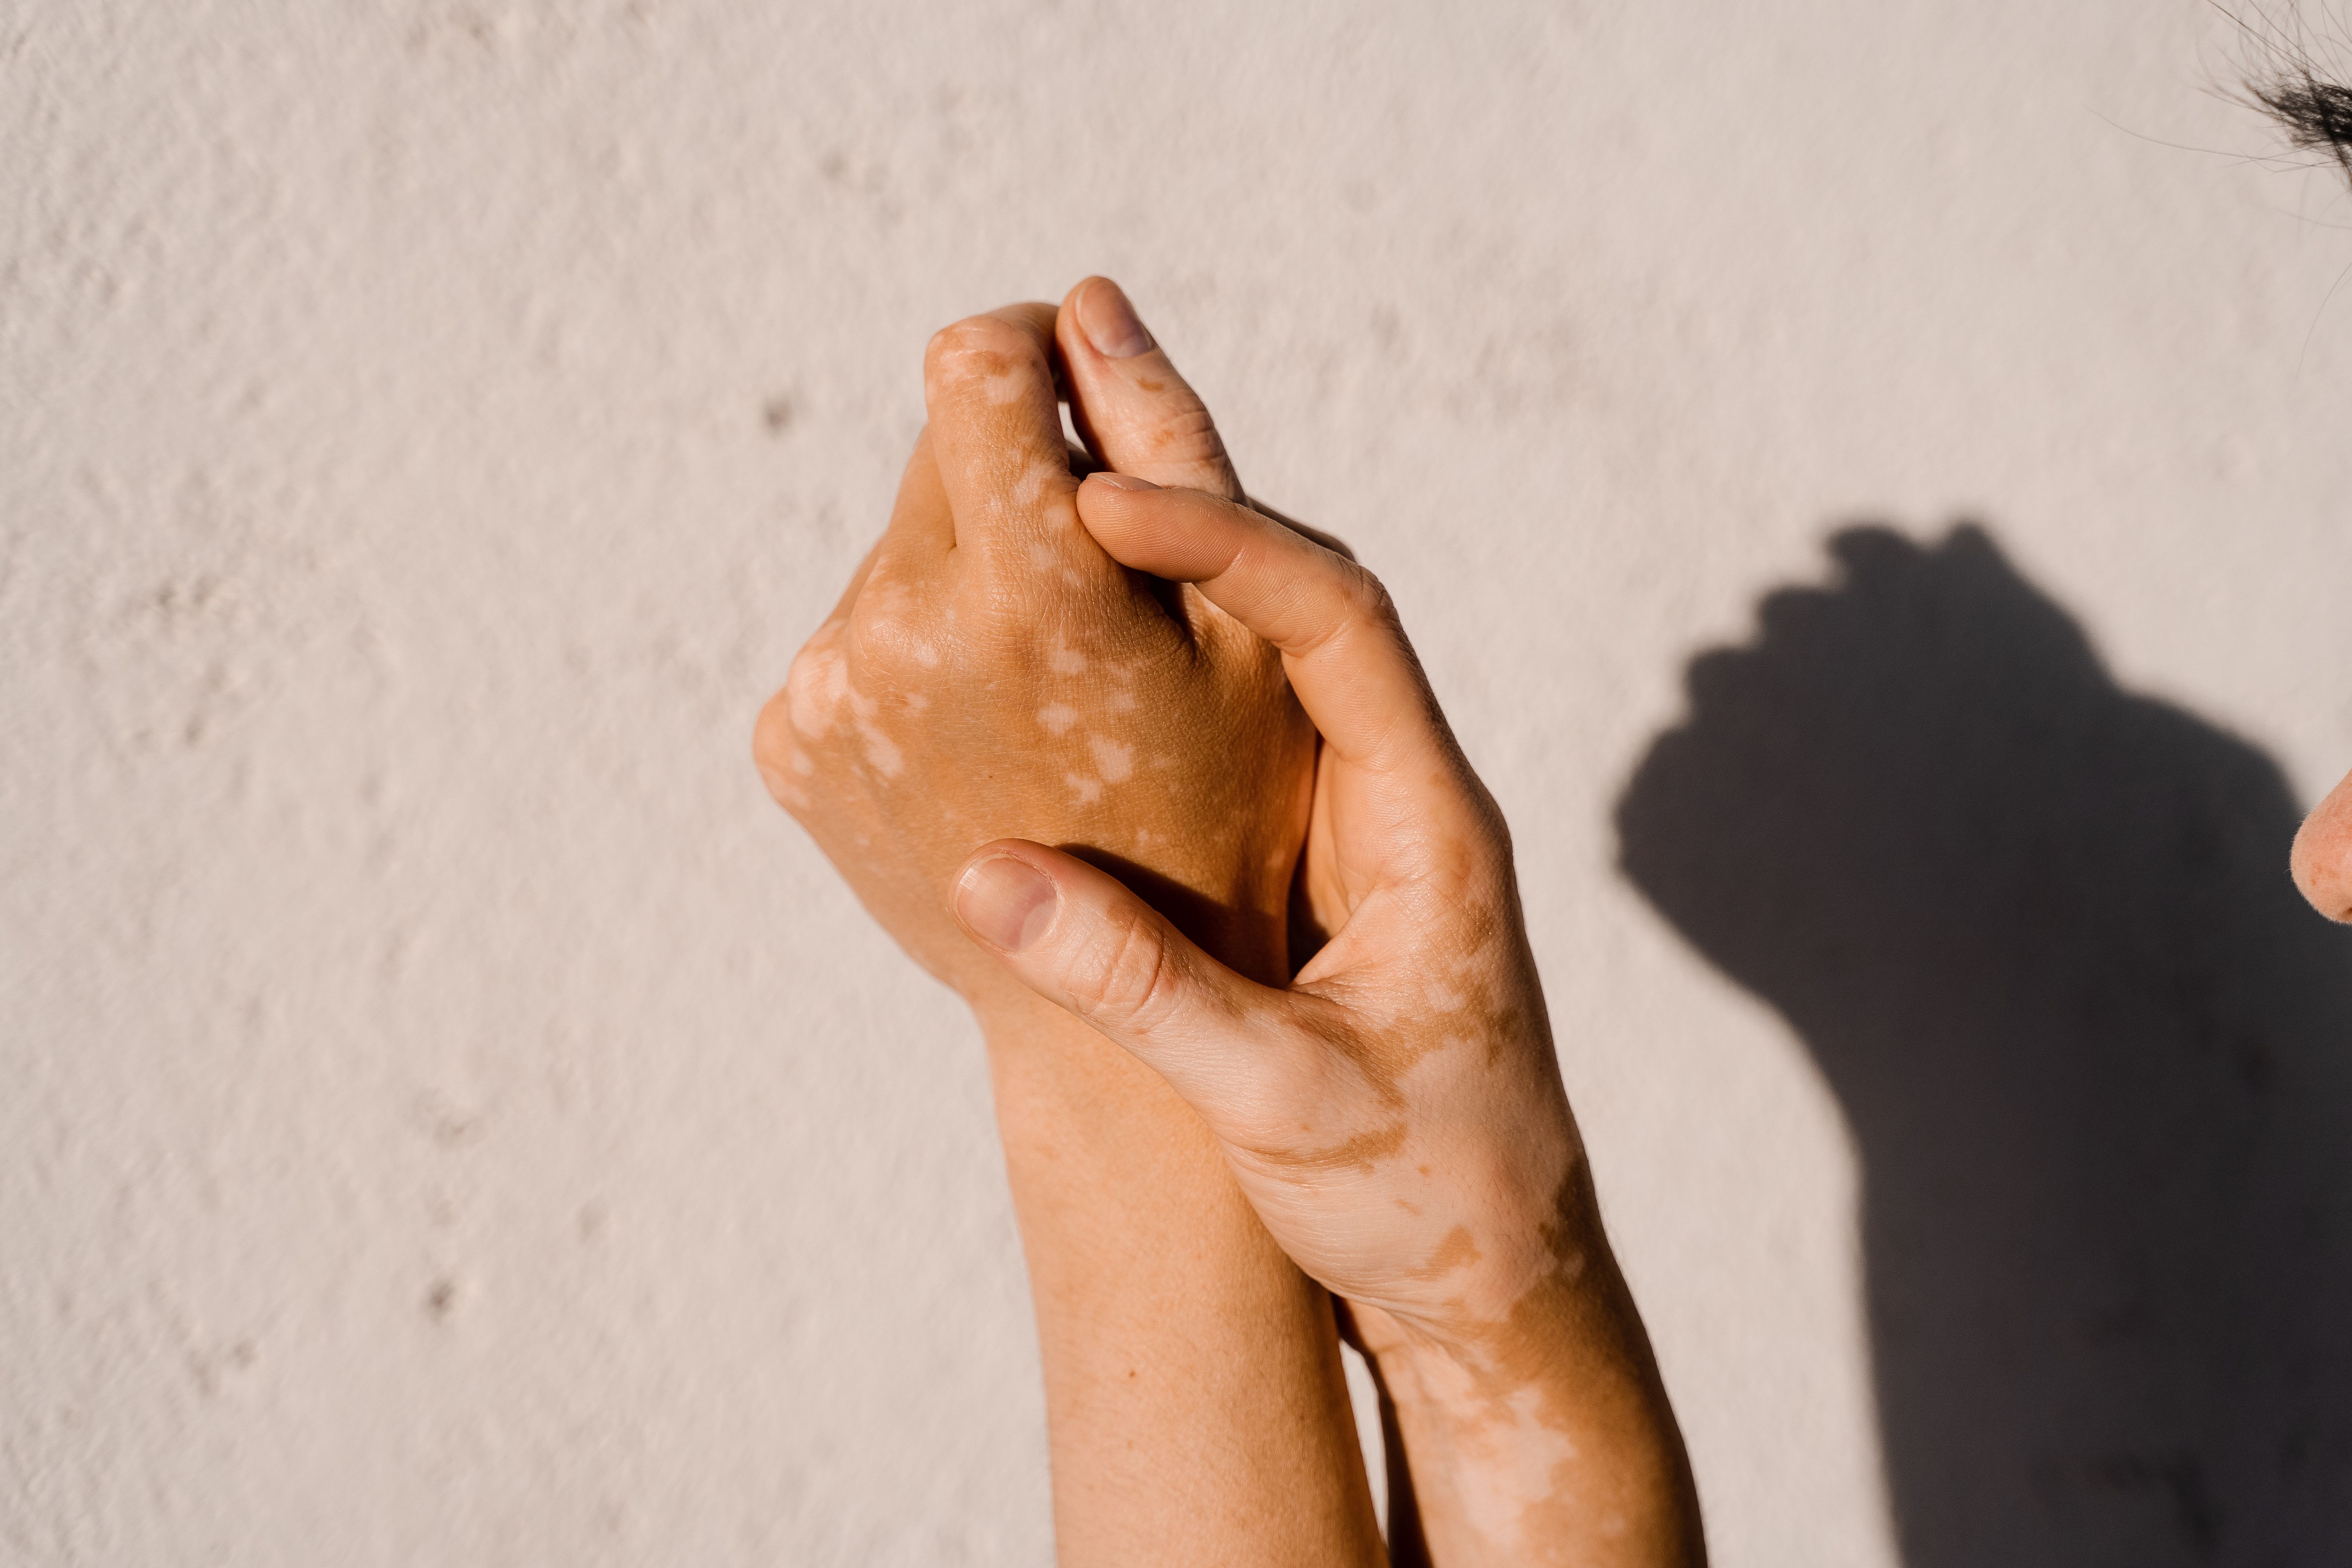 Uptake of Vitiligo Treatment Low in the First Year After Diagnosis - AJMC.com Managed Markets Network